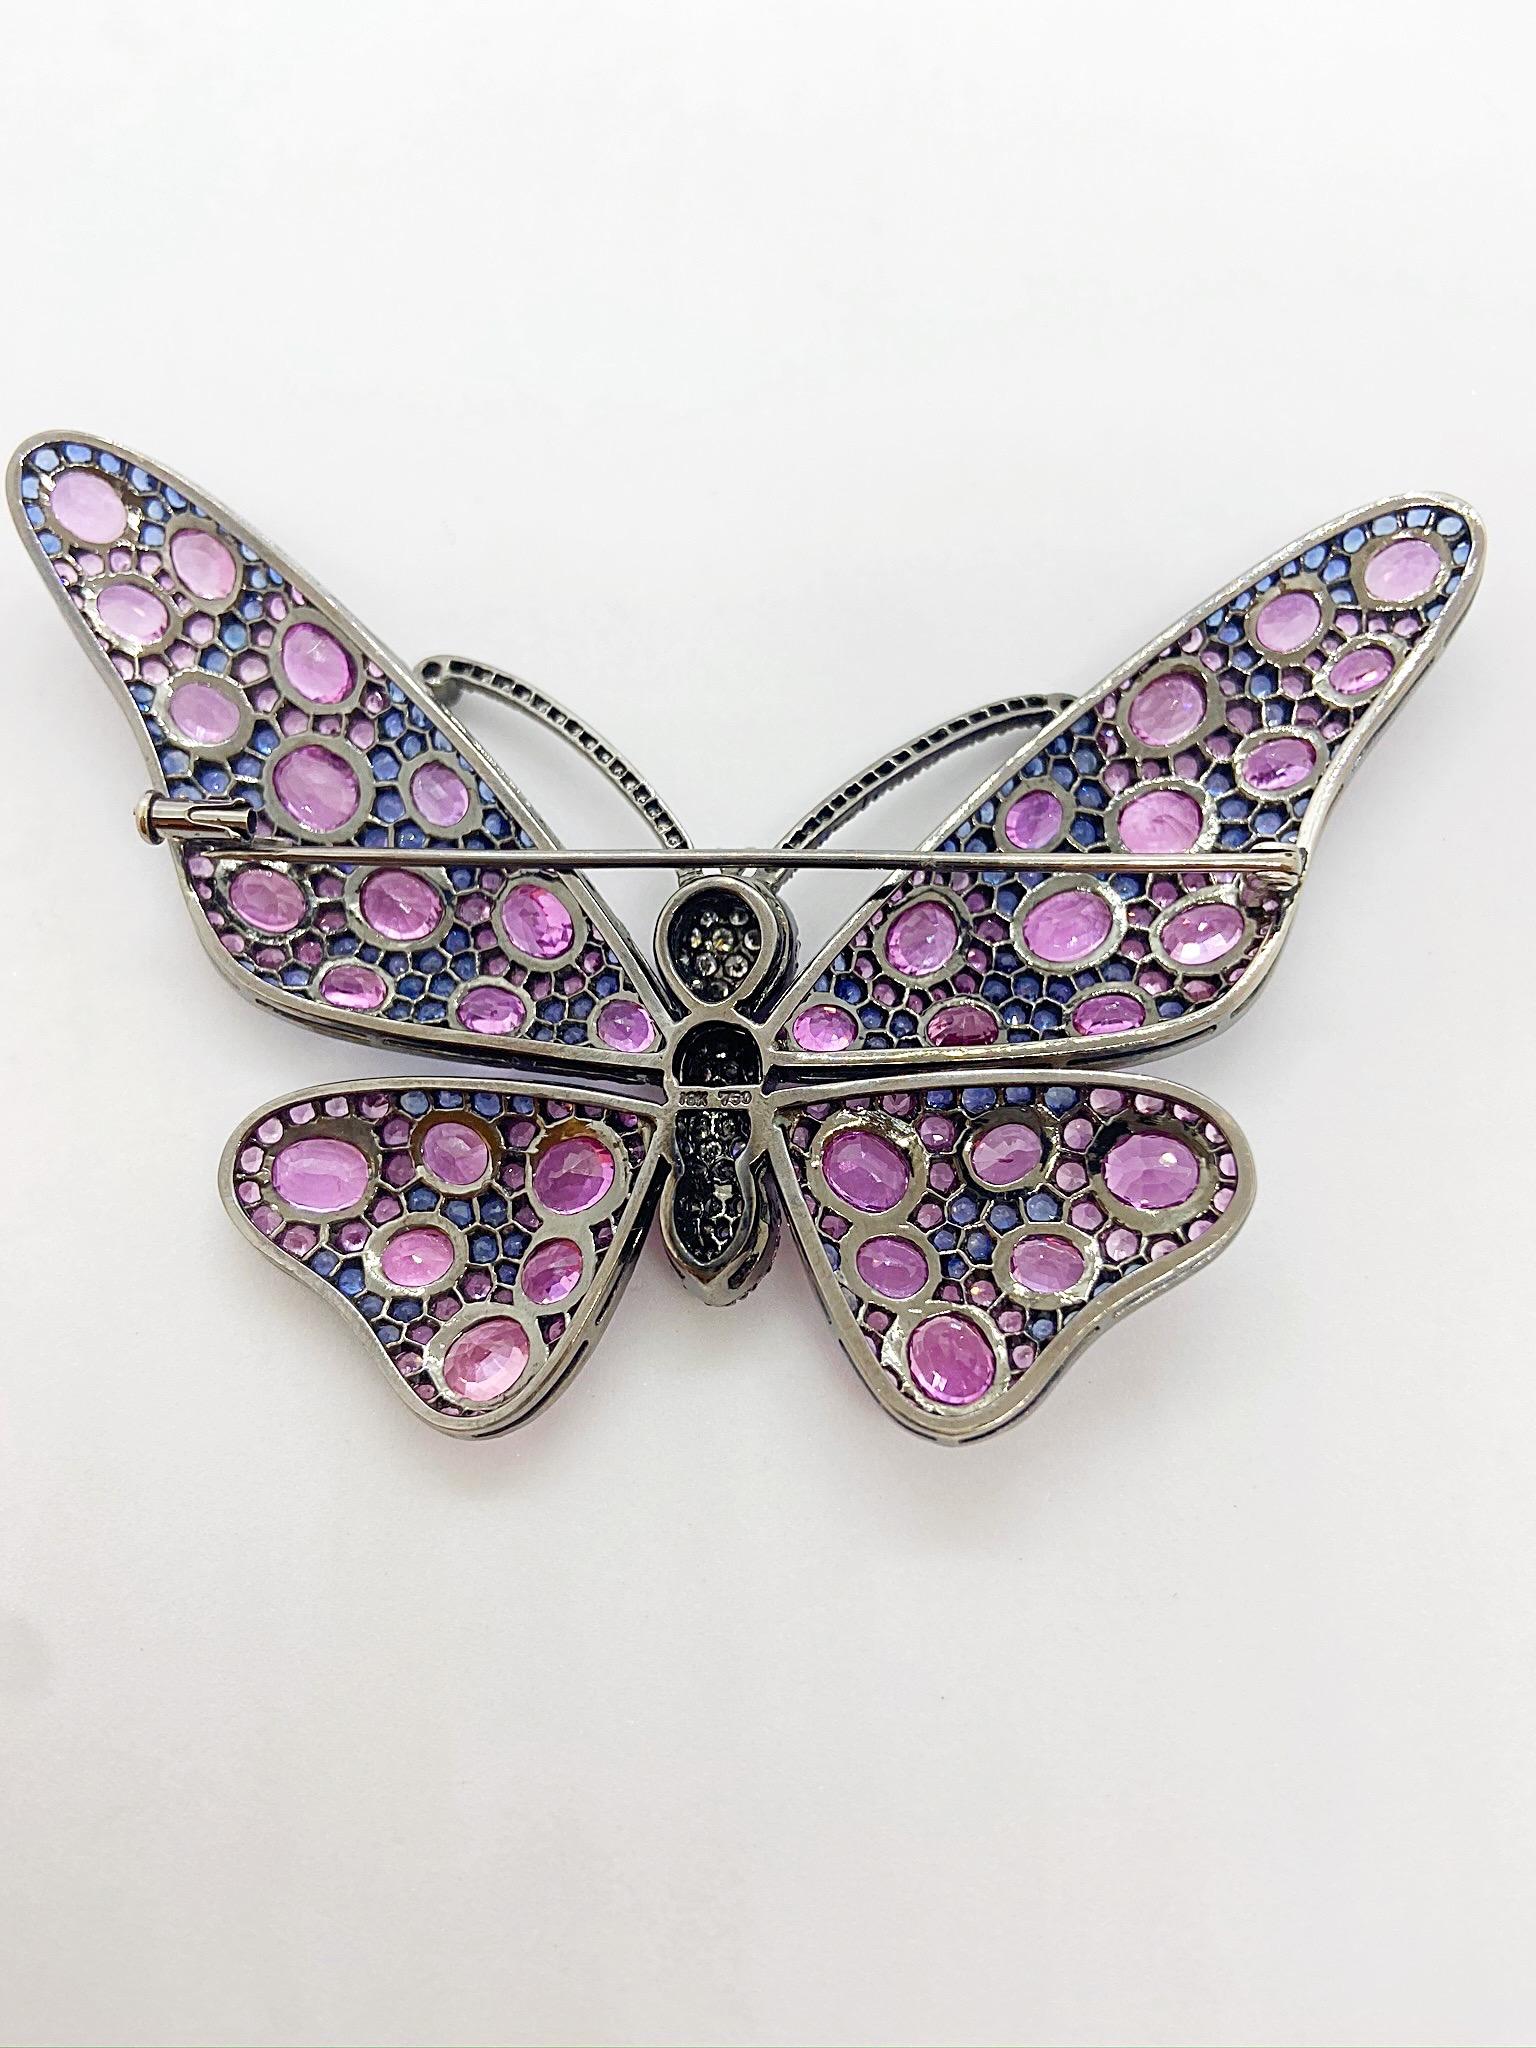 Oval Cut 18 Karat Blackened Gold Butterfly Brooch with Diamonds, Pink and Blue Sapphires For Sale